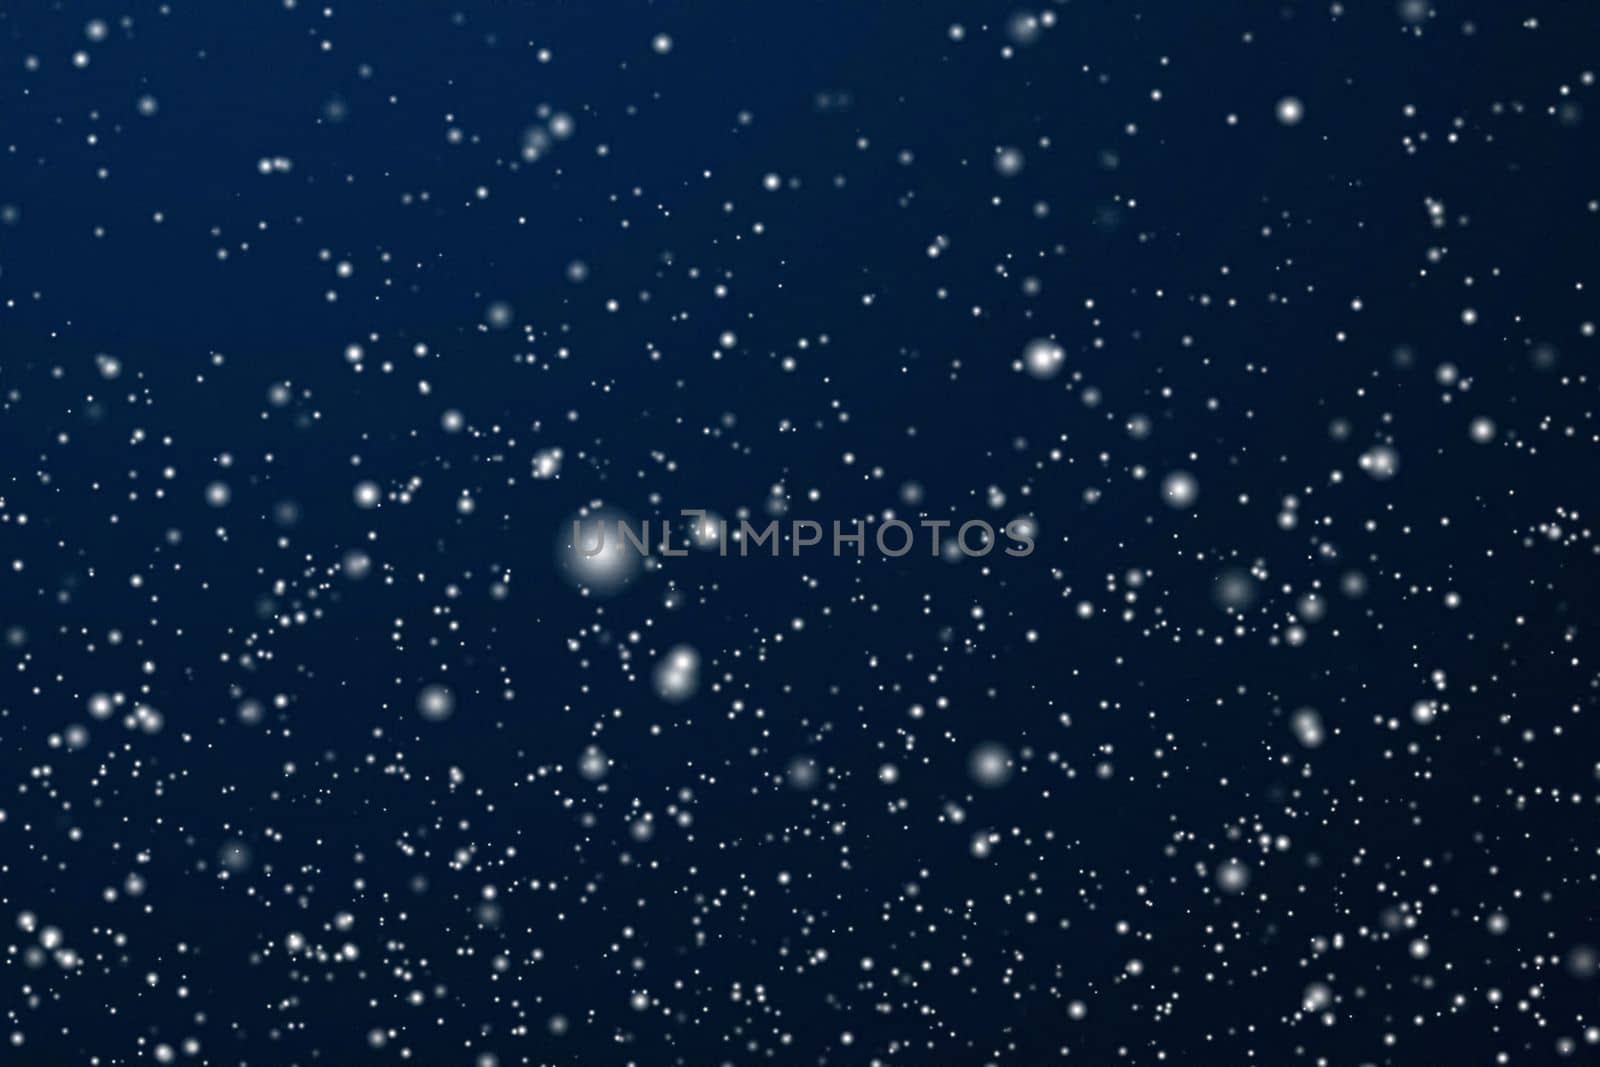 Winter holidays and wintertime background, white snow falling on dark blue backdrop, snowflakes bokeh and snowfall particles as abstract snowing scene for Christmas and snowy holiday design, copyspace